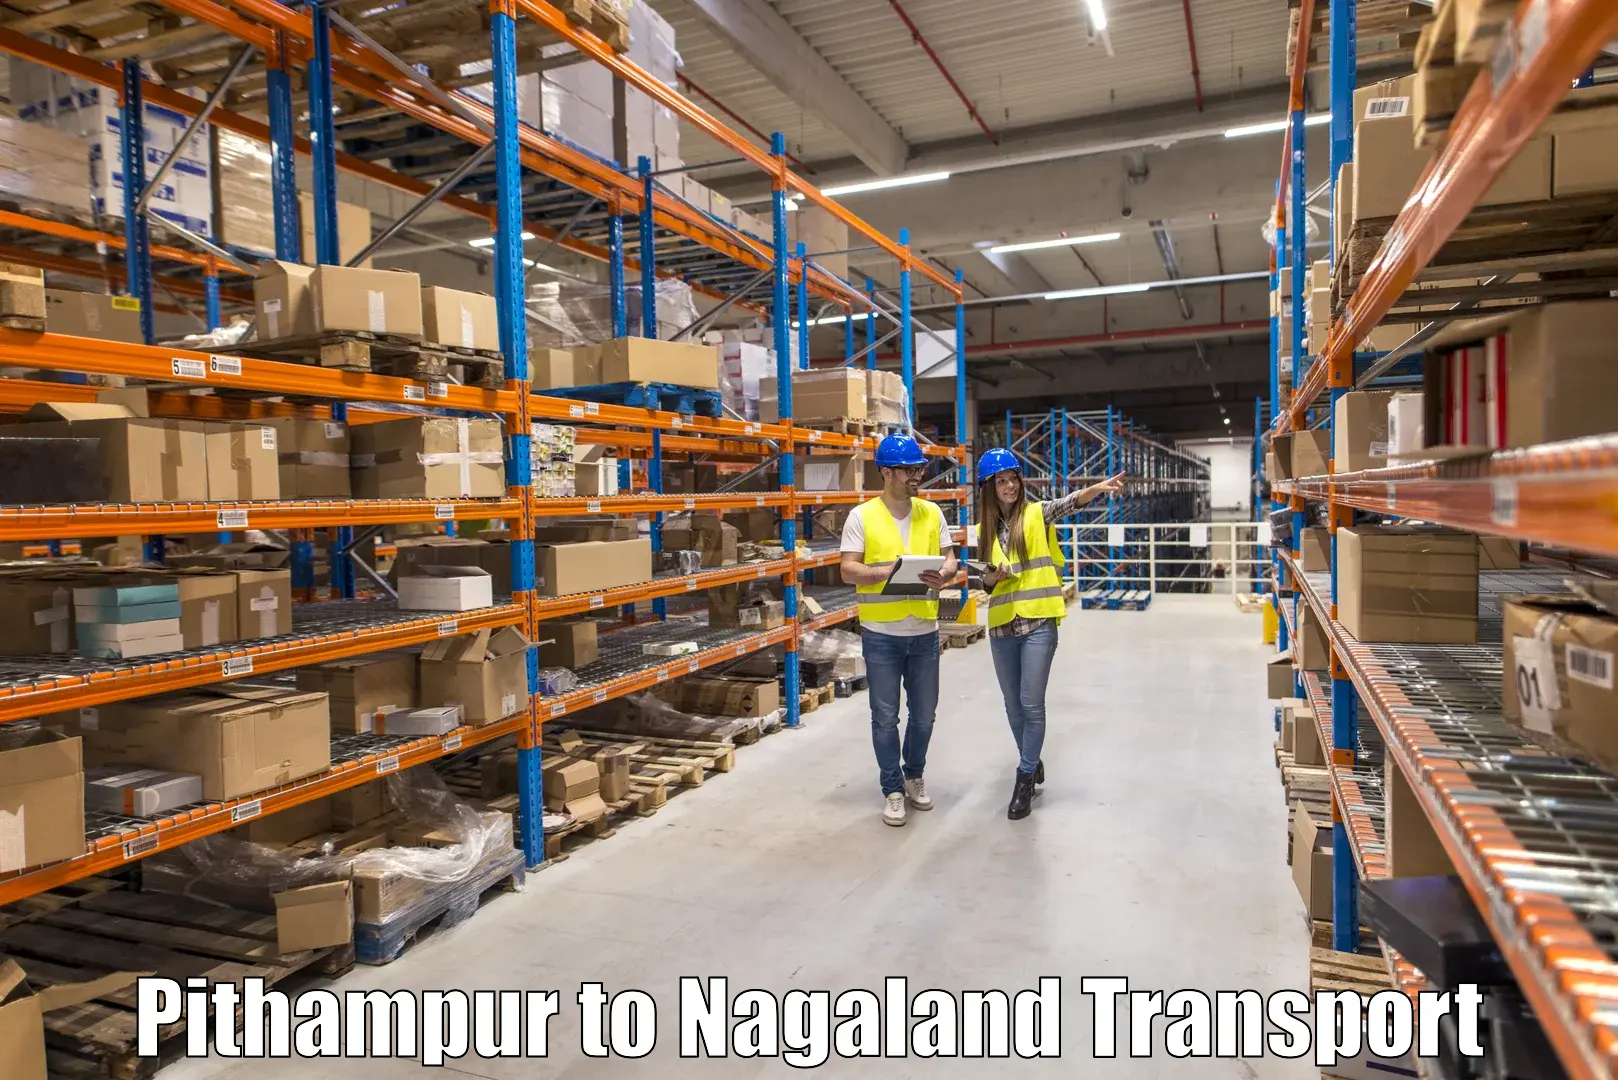 Air freight transport services Pithampur to Mon